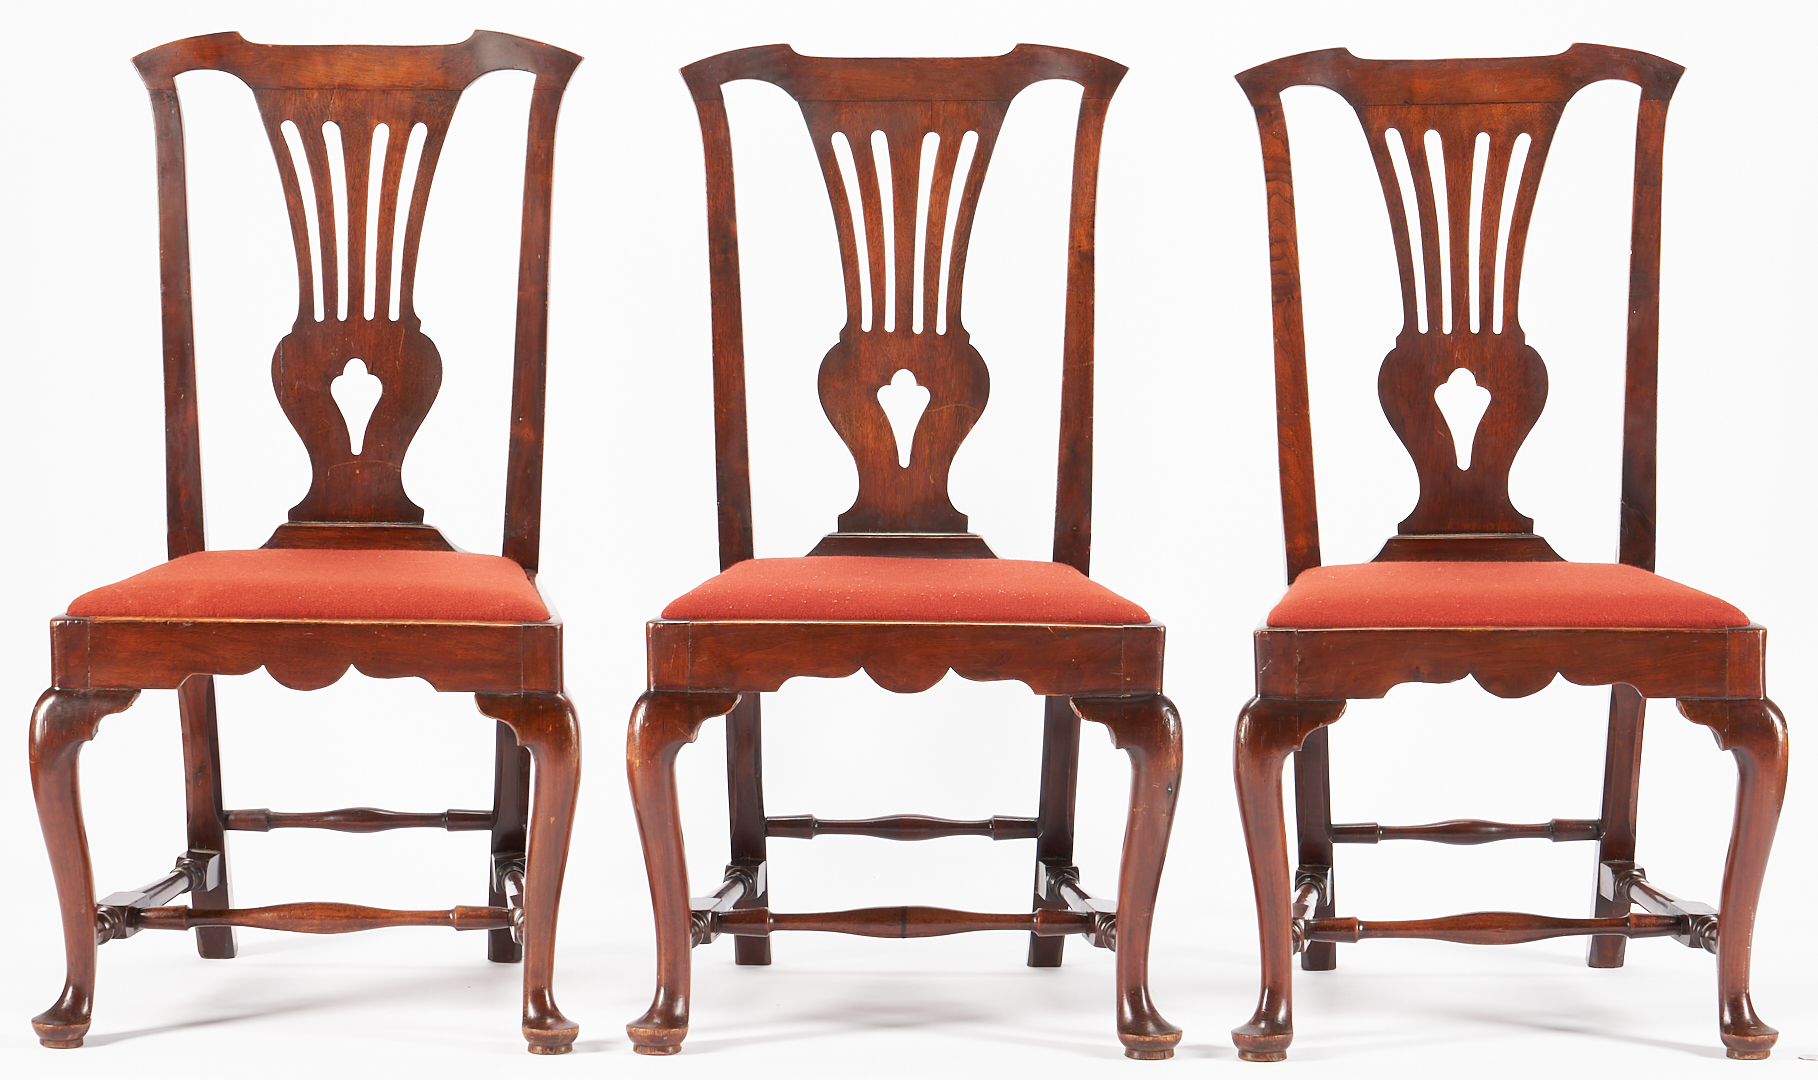 Lot 223: 6 Period Chippendale Chairs attrib. Portsmouth, NH